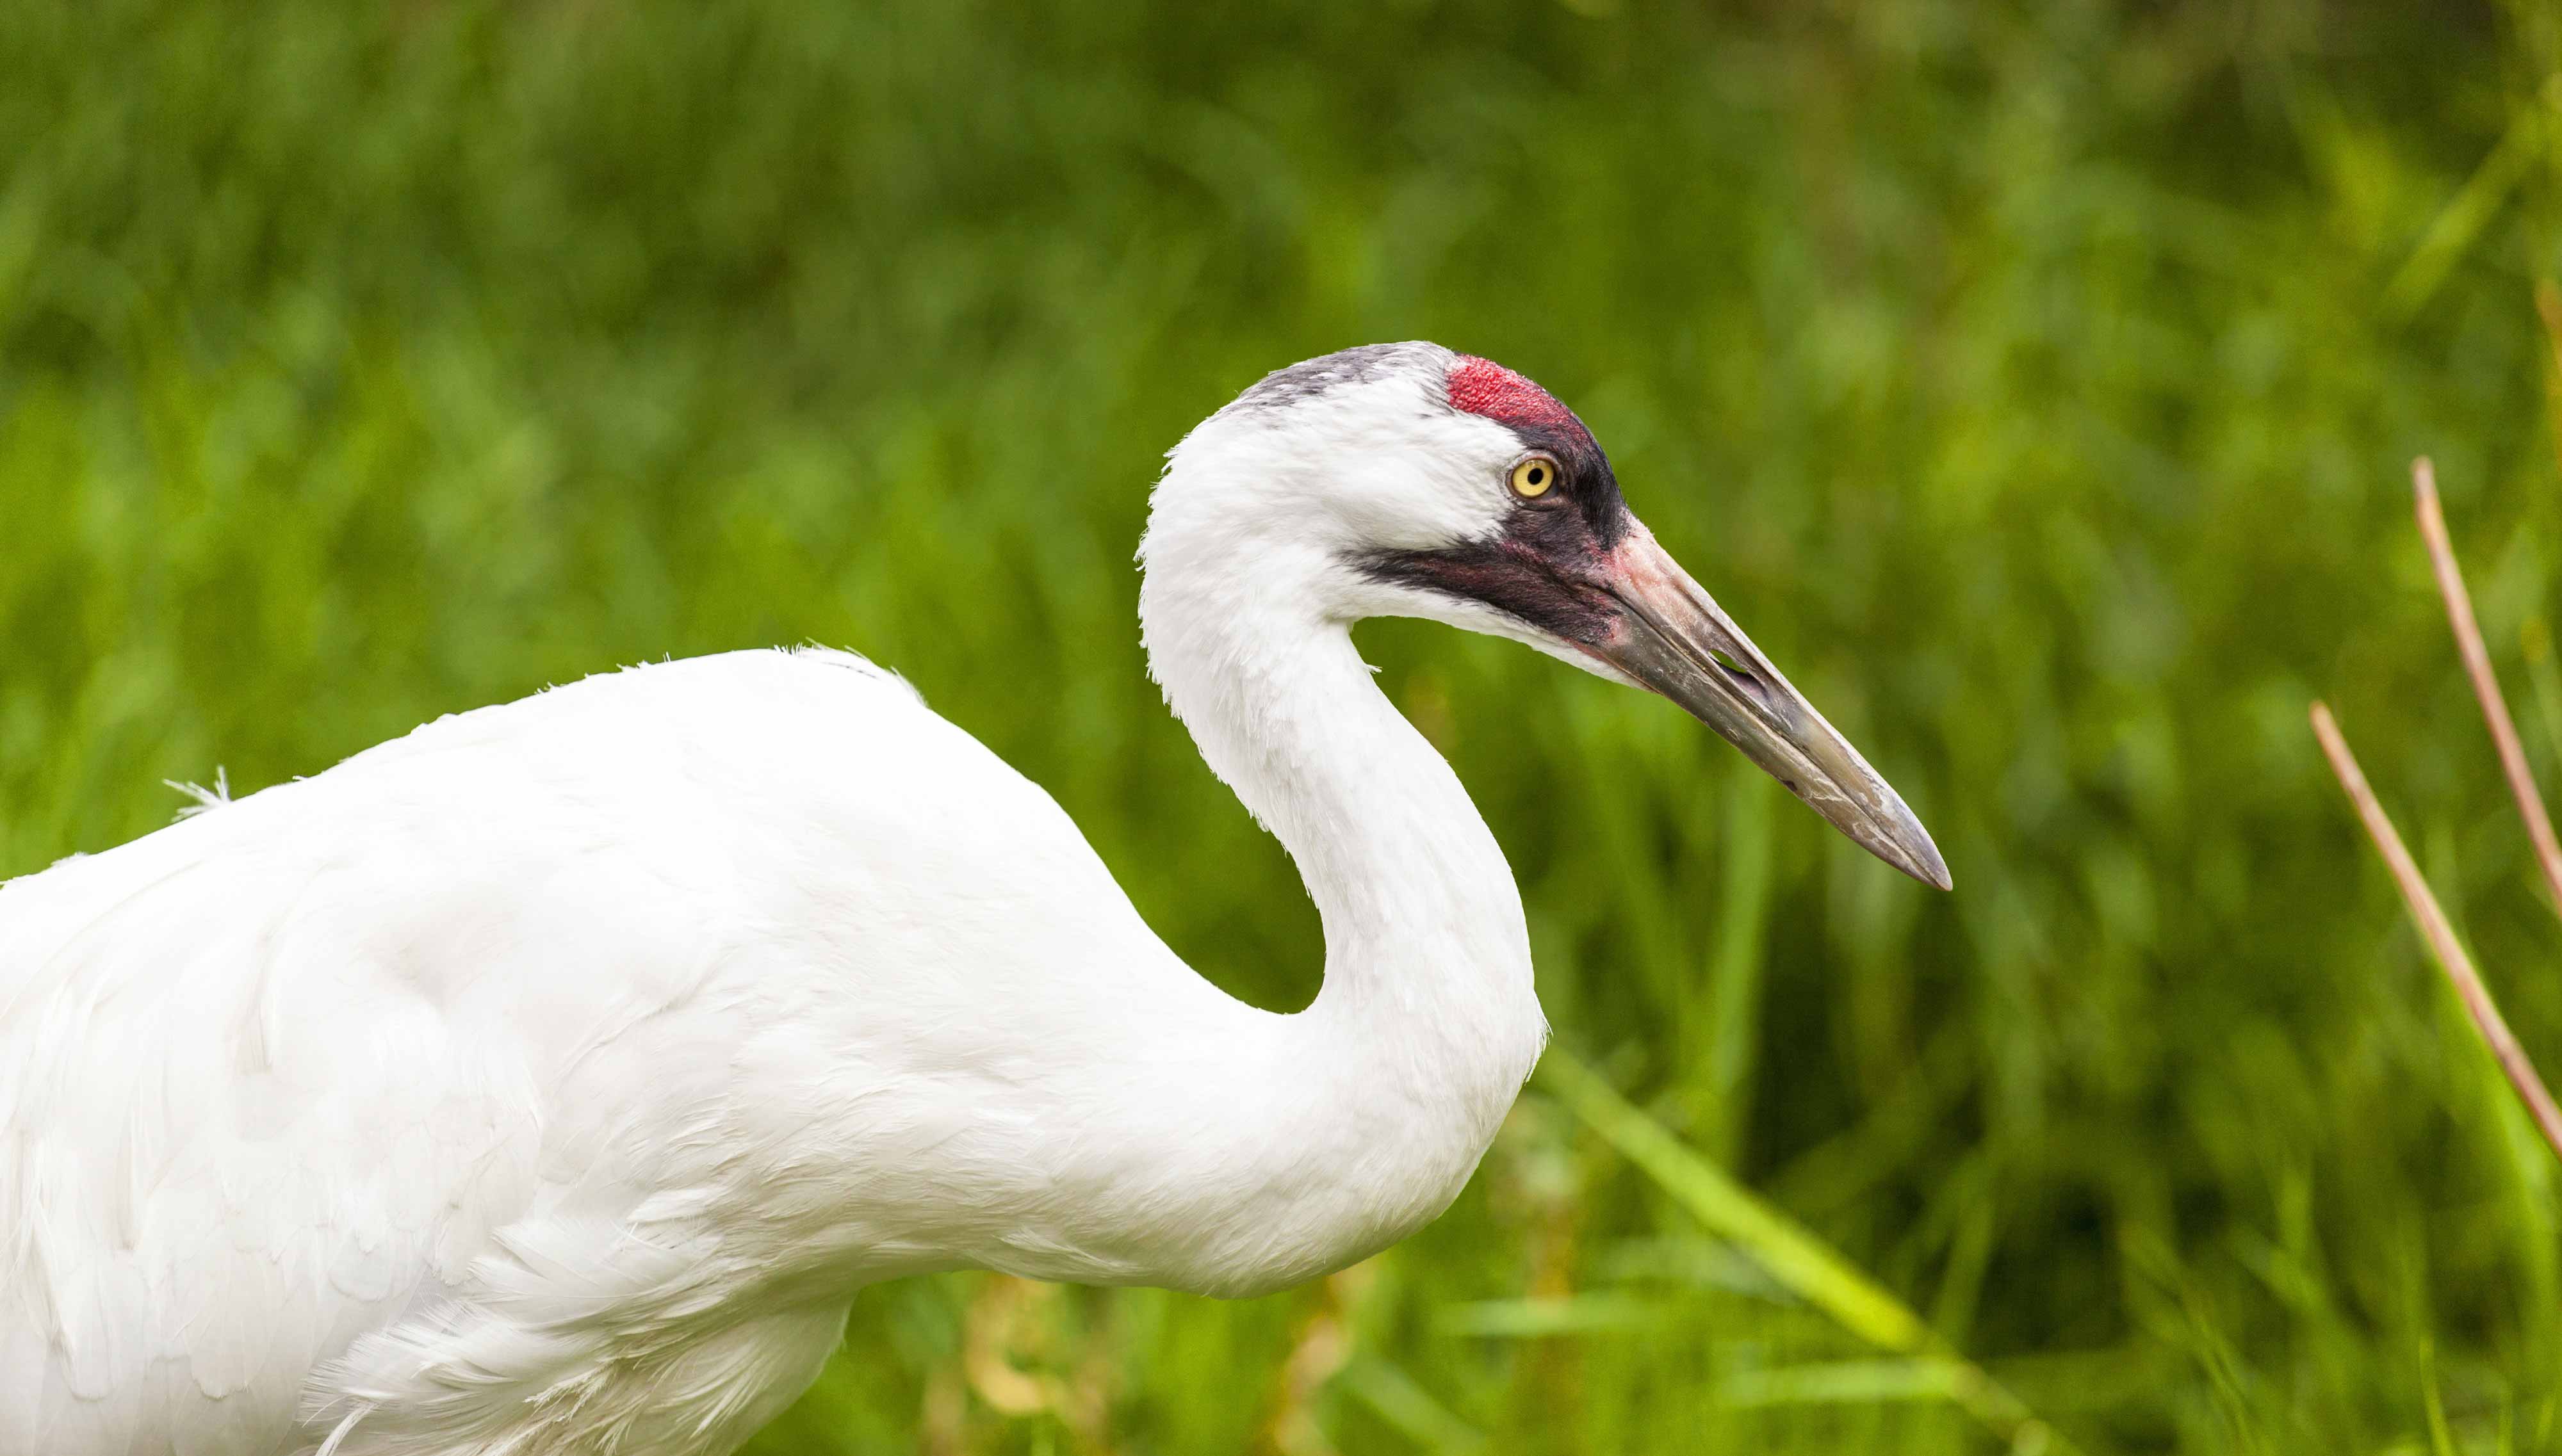 Close-up of a whooping crane walking in a field.